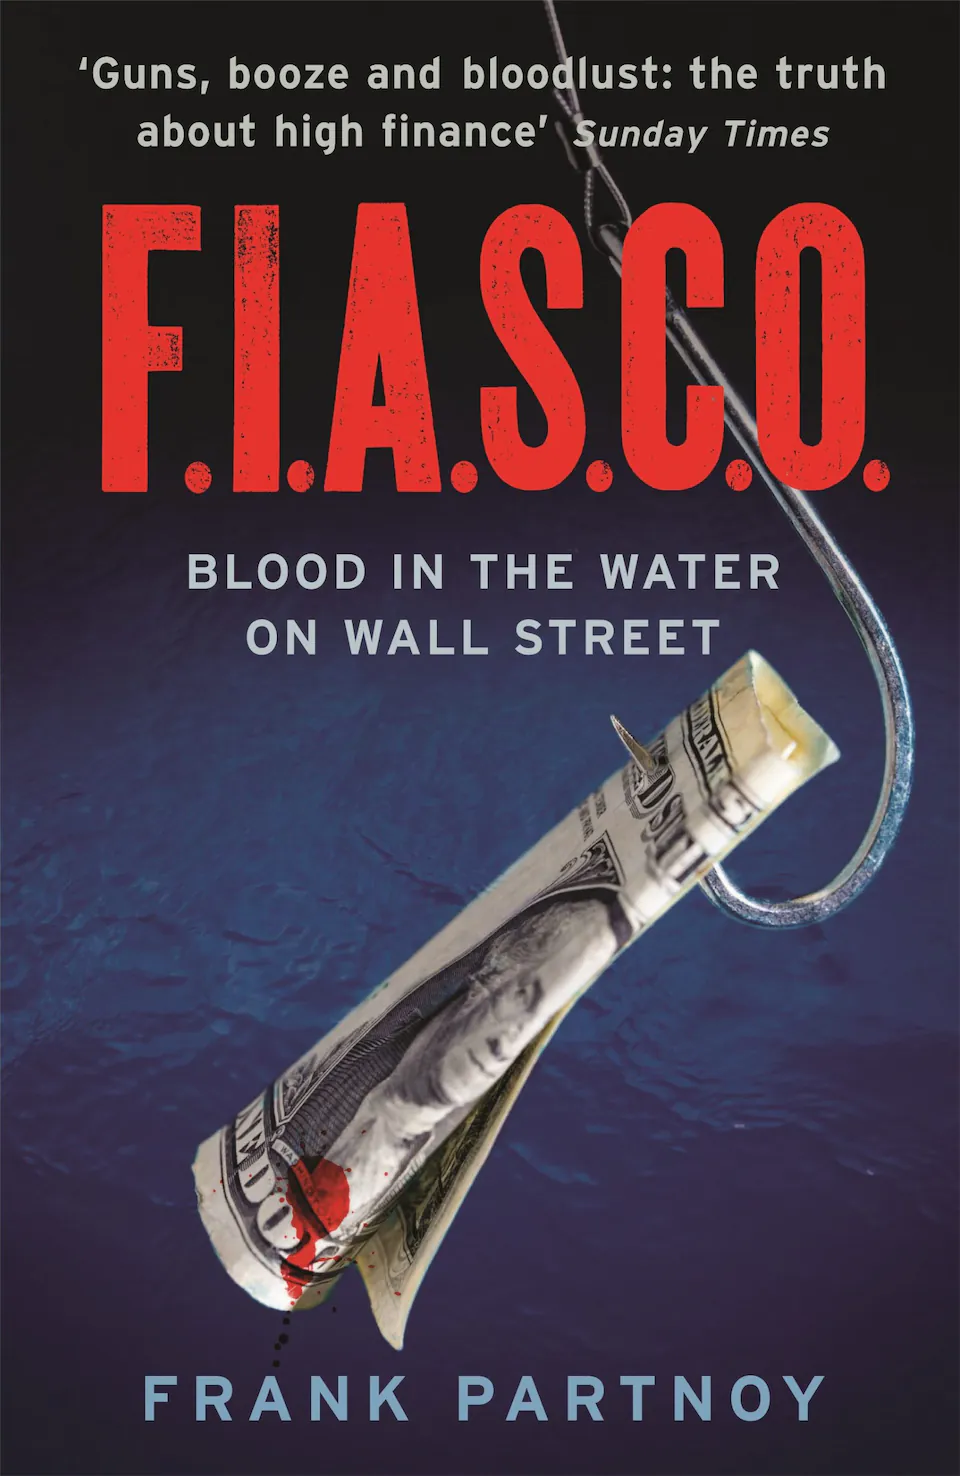 FIASCO: Blood in the Water on Wall Street by Frank Partnoy finished on 2024 Apr 27